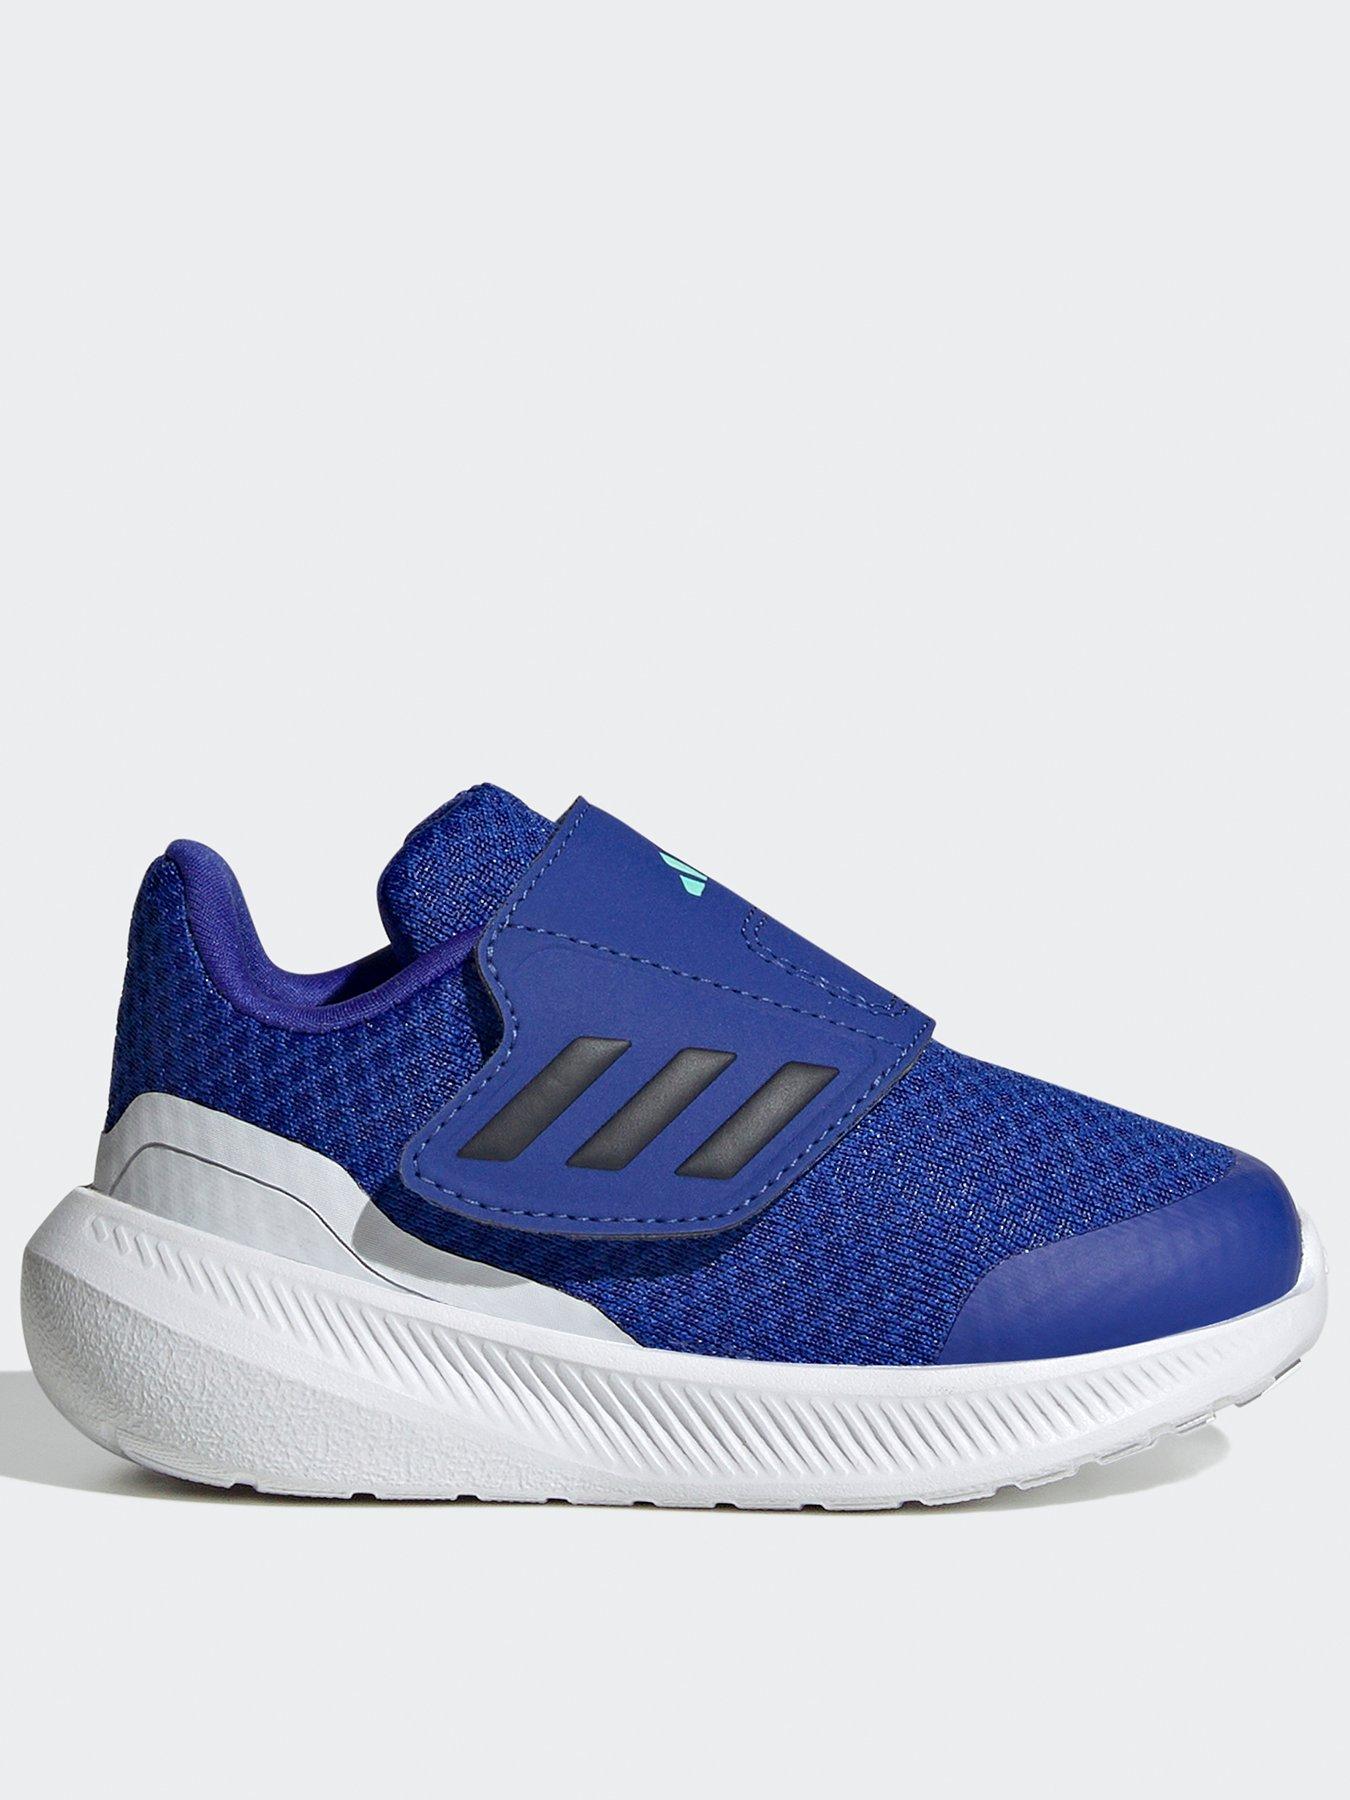 adidas Infants Runfalcon 3.0 Trainers - Blue, Blue, Size 4 Younger